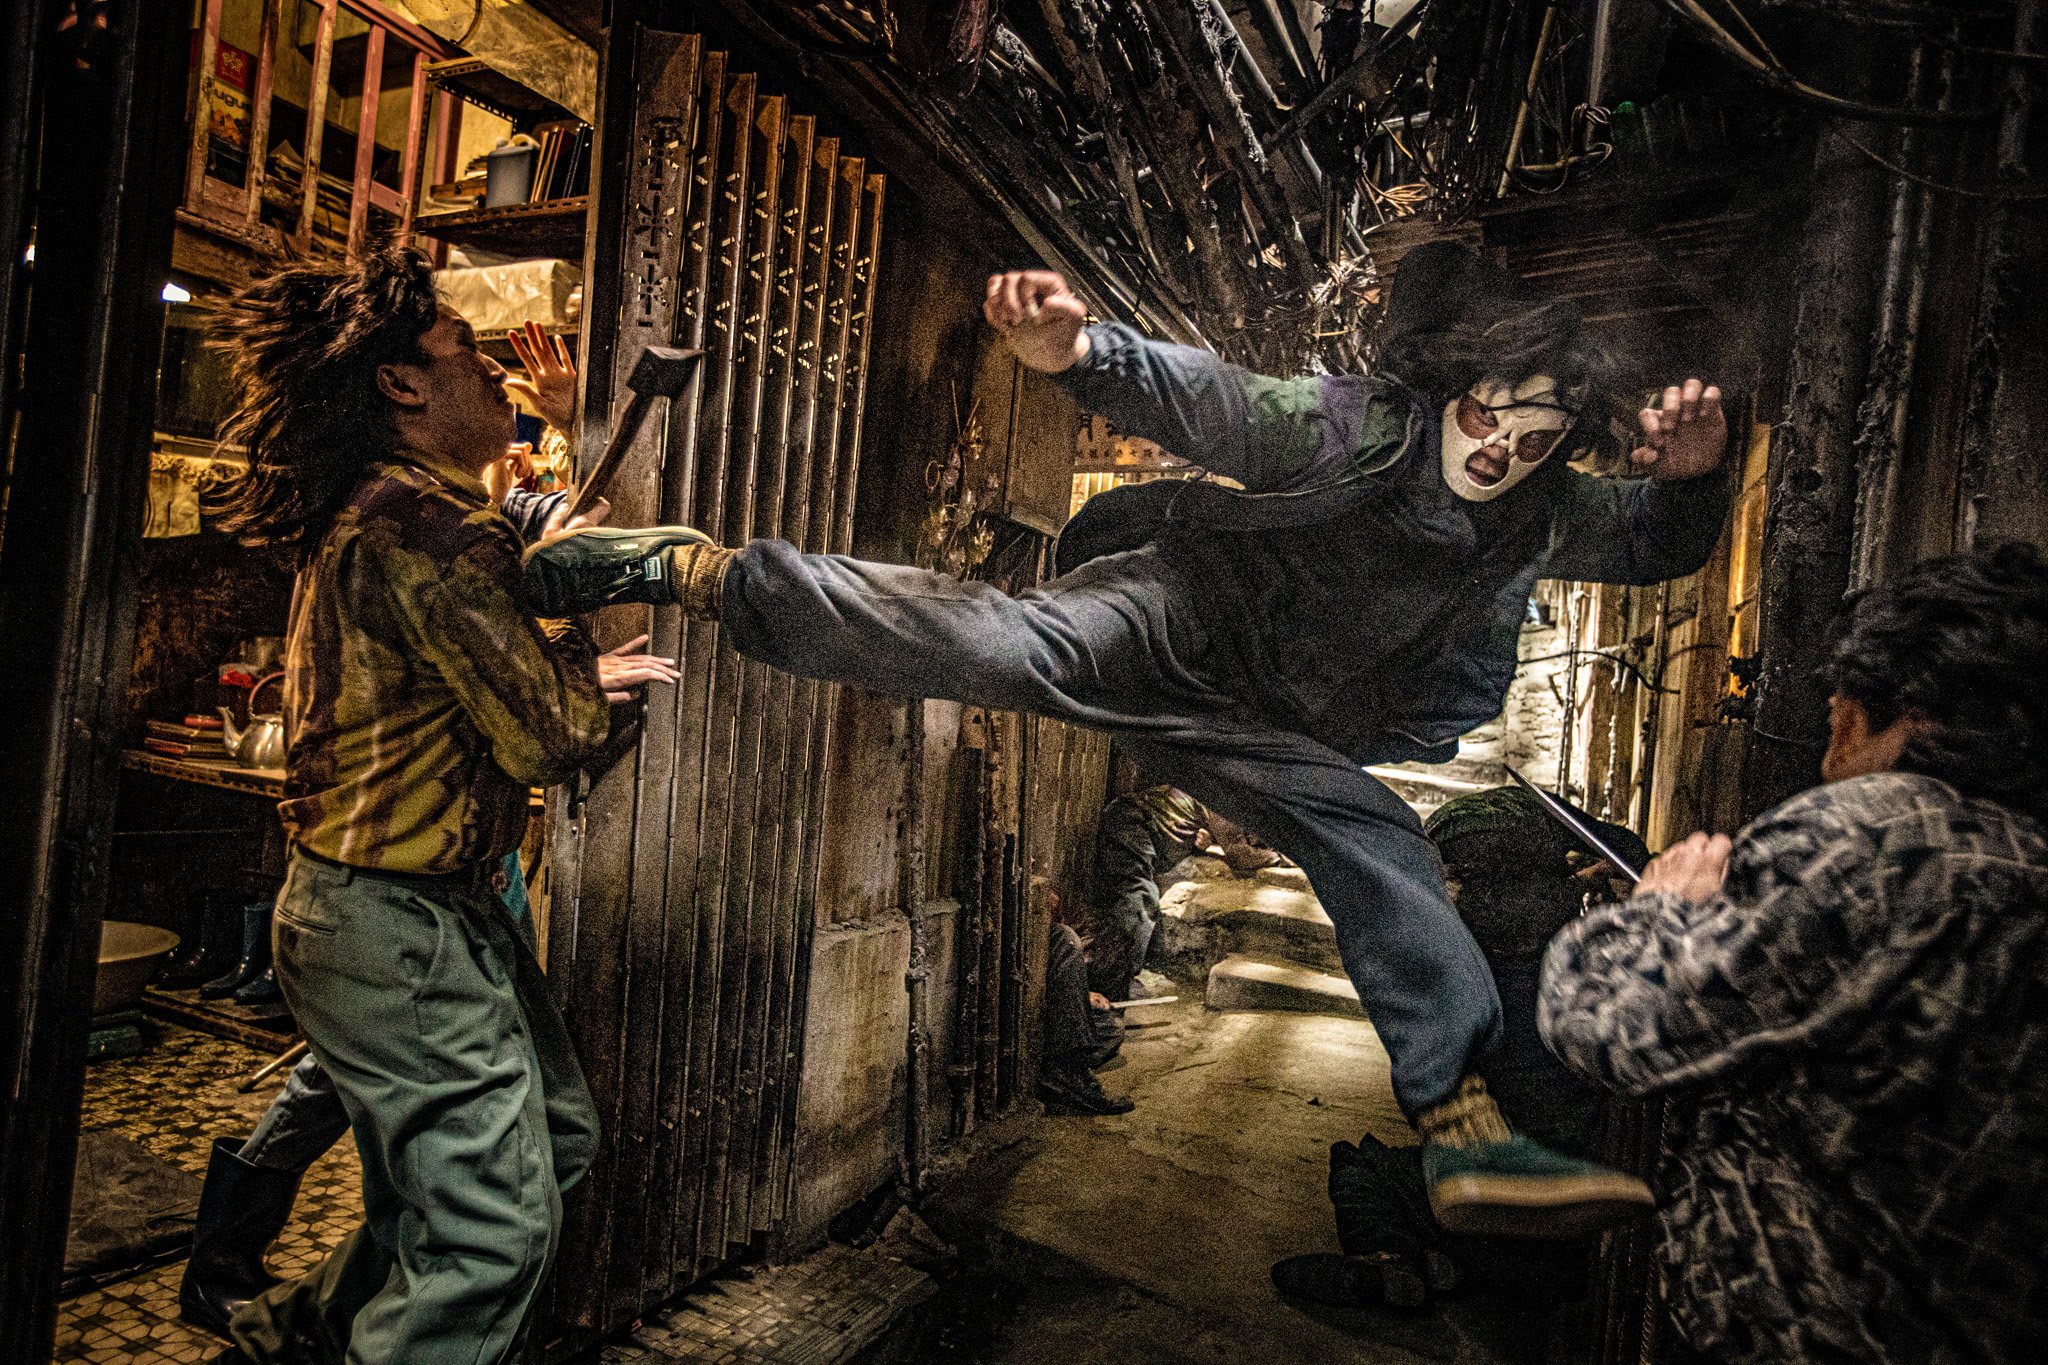 Action film “Twilight of the Warriors: Walled In” has become the highest-grossing film in Hong Kong this year with HK$105 million. Photo: Handout